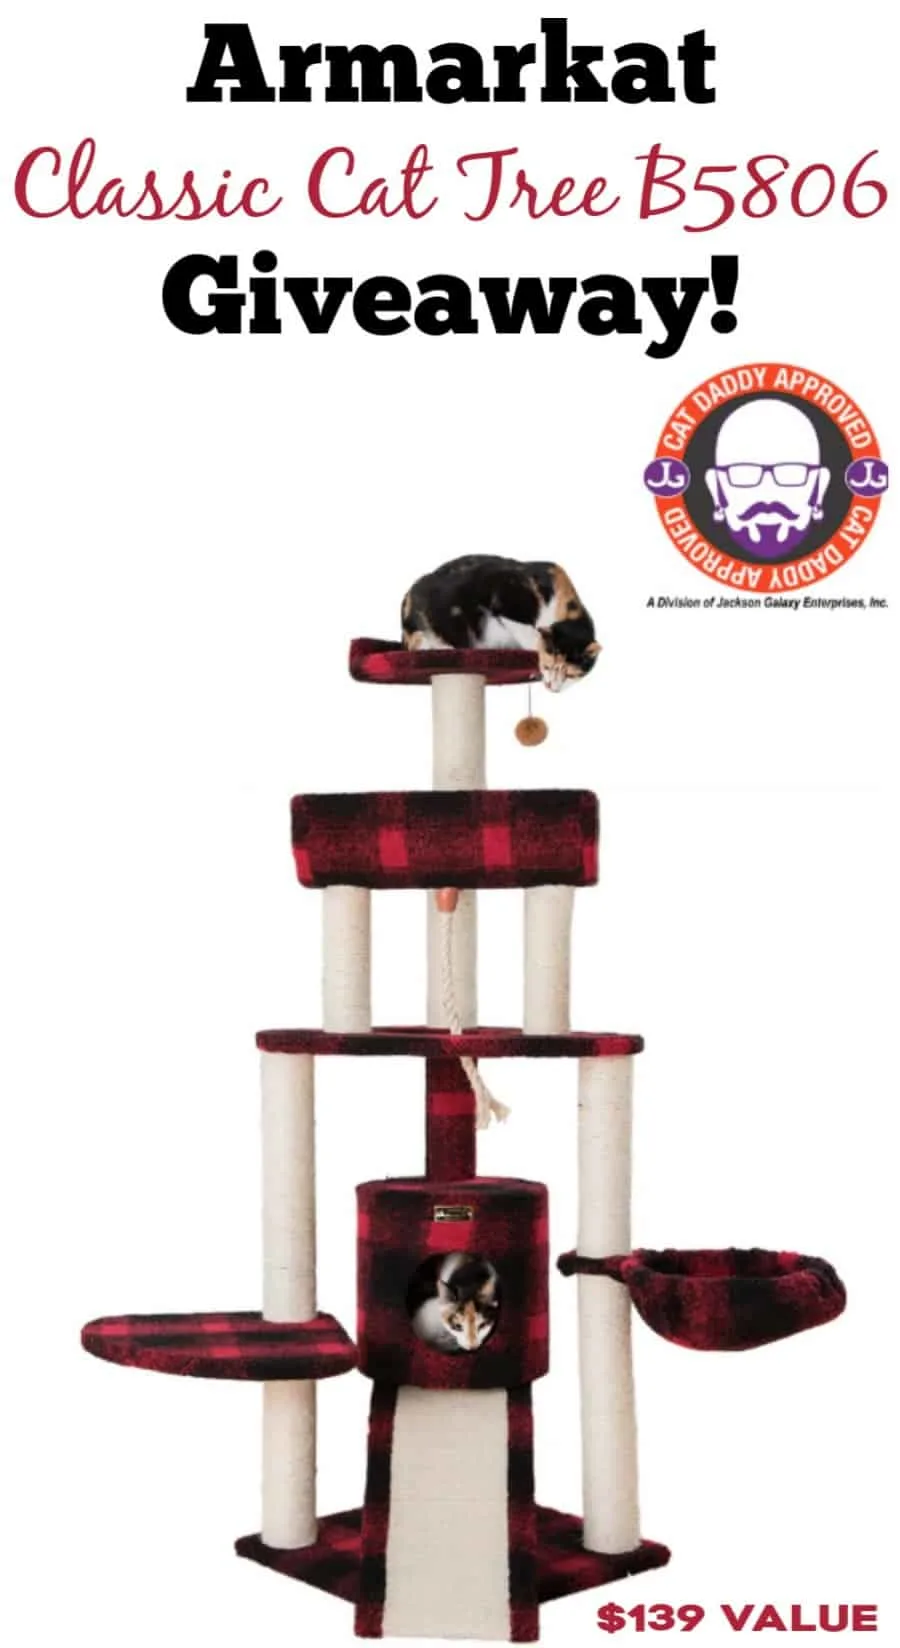 Armarkat Cat Tower Giveaway